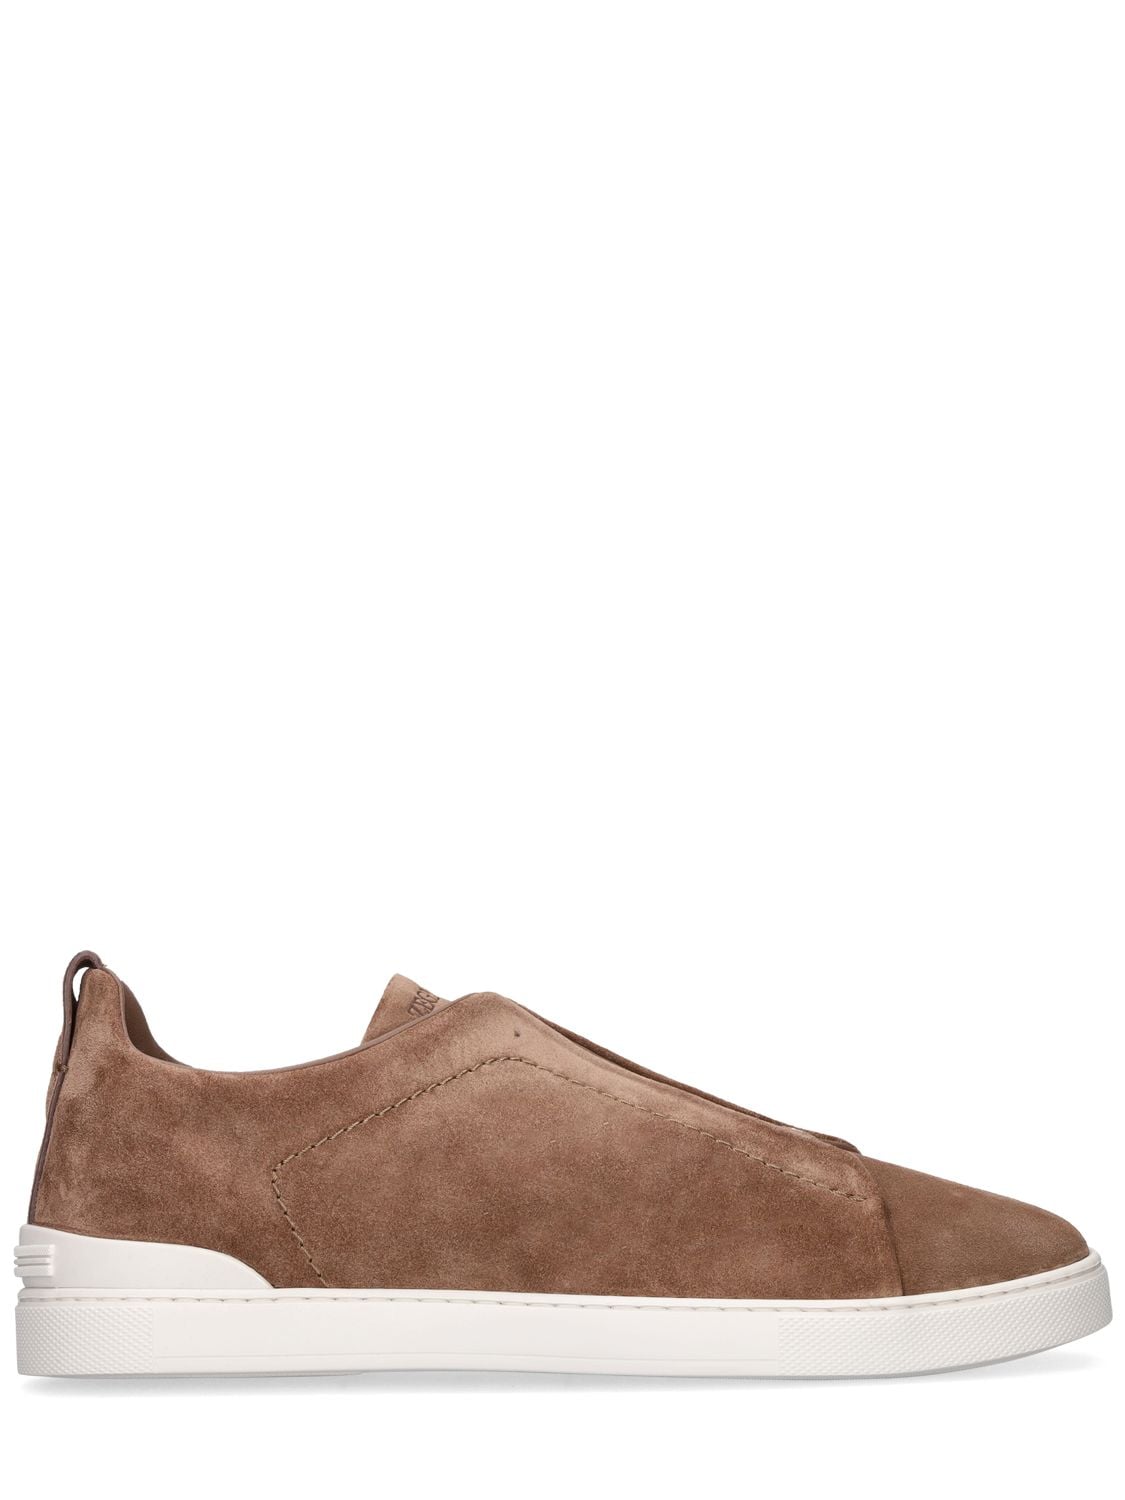 Zegna Triple Stitch Leather Low-top Sneakers In Beige